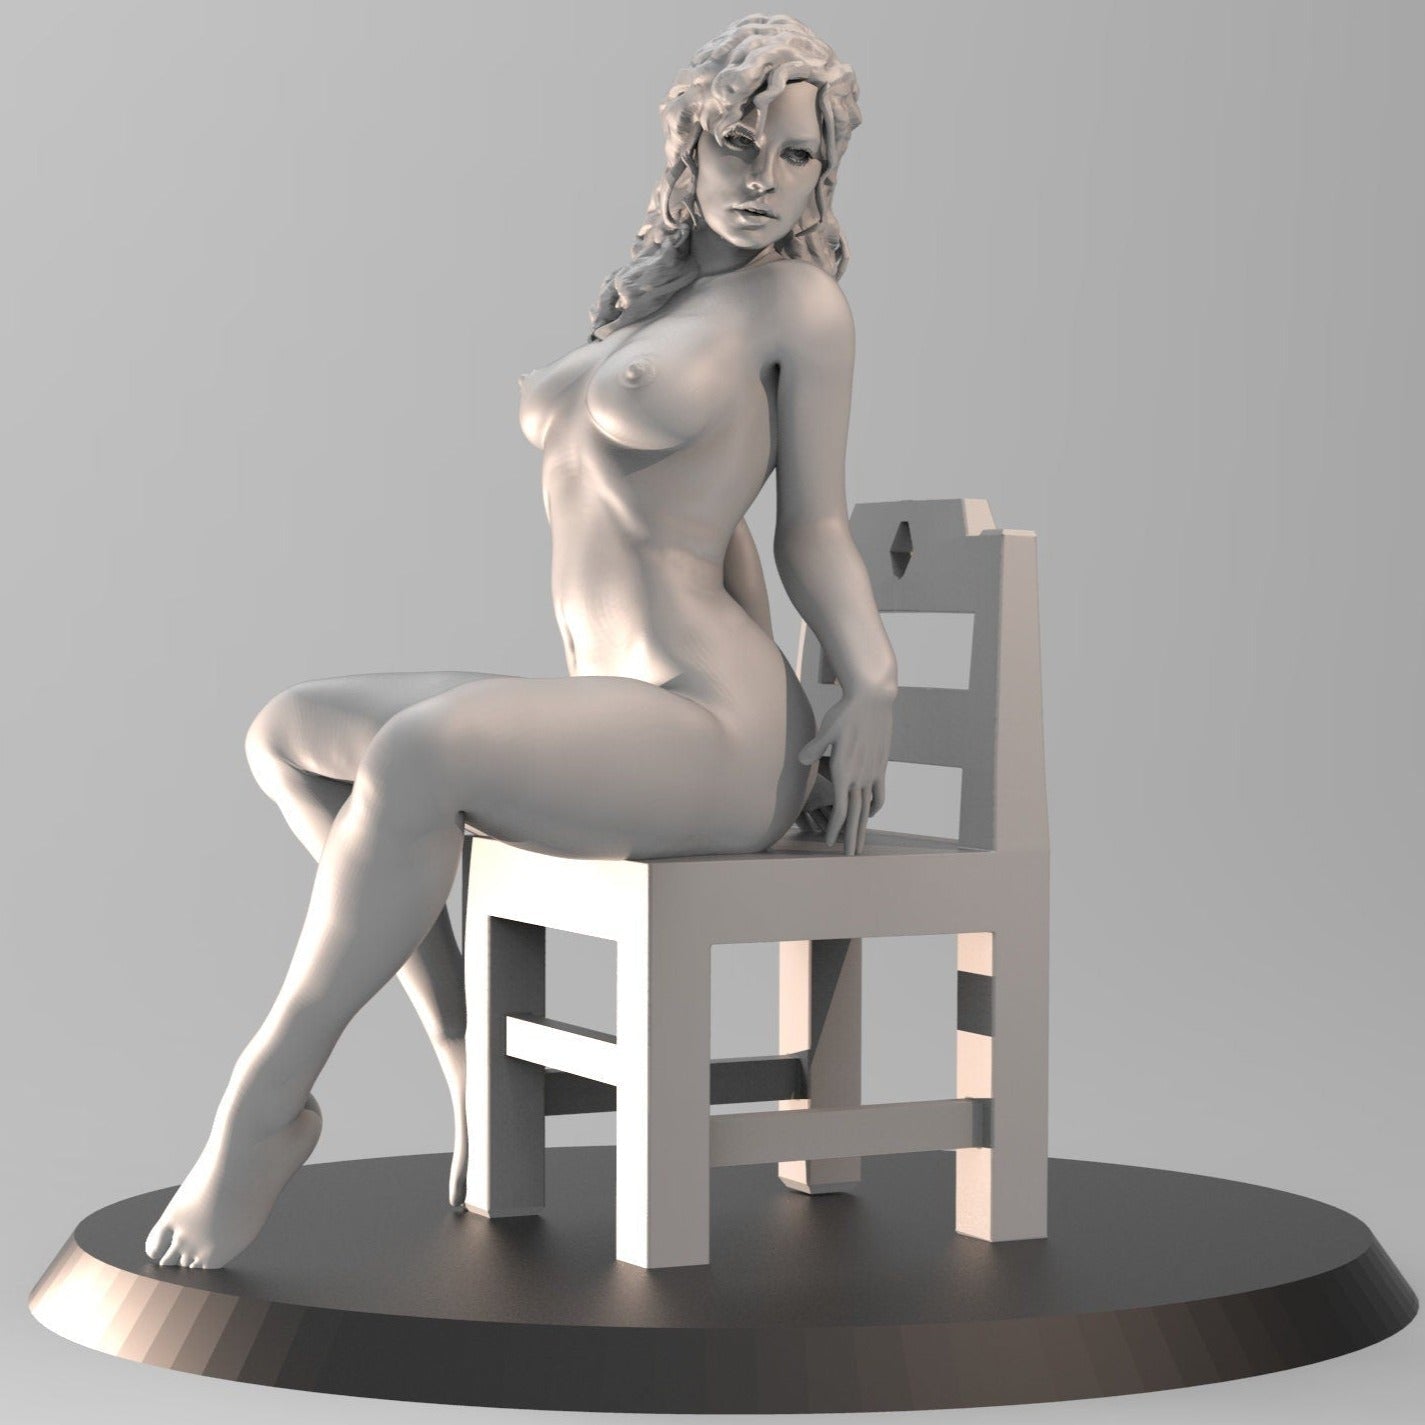 Pinup Girl Vol.1 EVELYN | 35mm / 75mm | 3D Printed | Unpainted | Sexy | Pin|up | NSFW Version | Figurine | Figure | Miniature | Sexy |